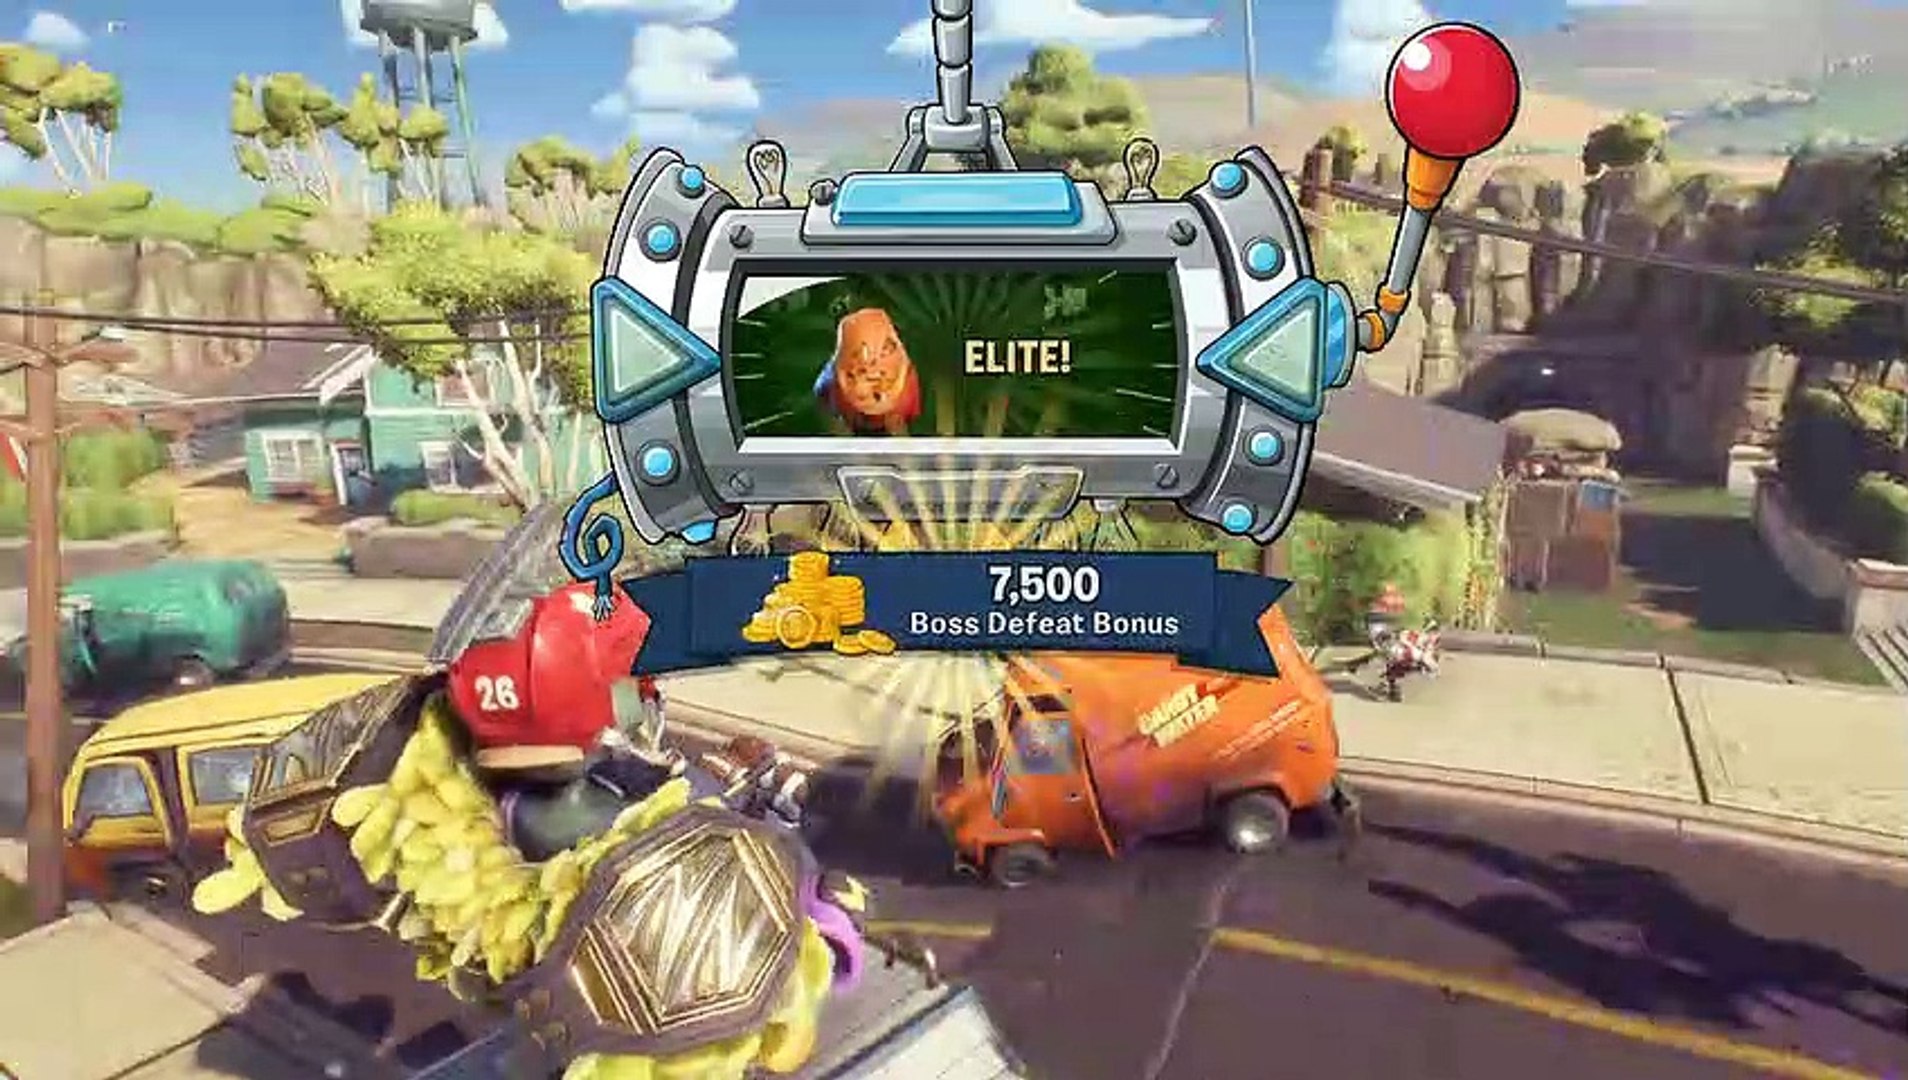 Plants vs. Zombies: Battle for Neighborville - Official Gameplay